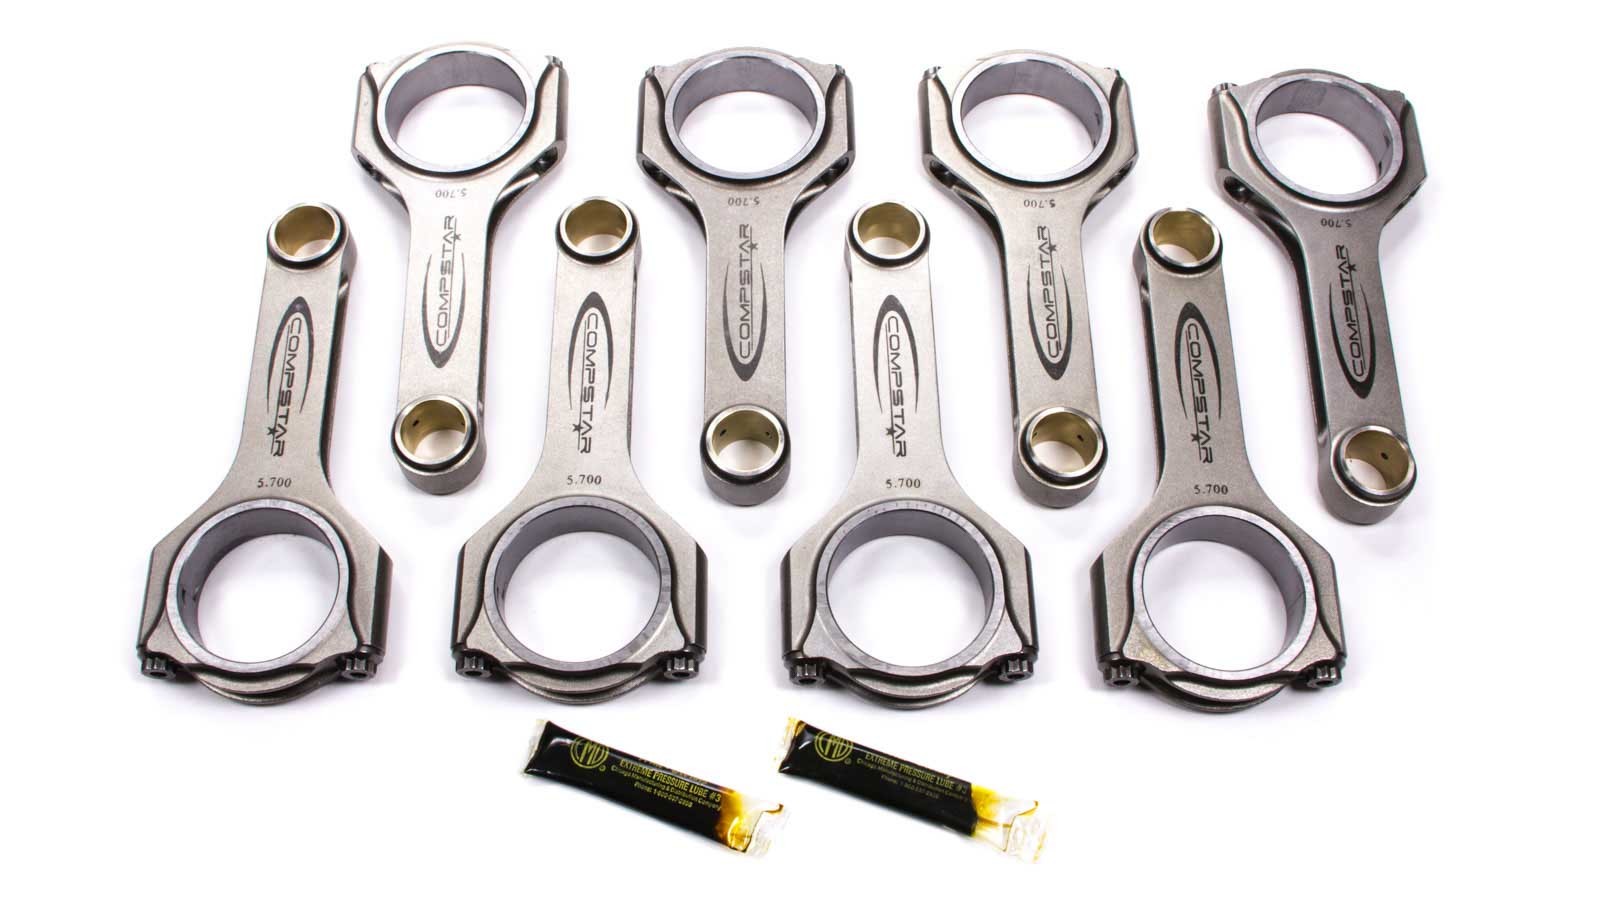 Callies CSA5700DS2A2AH Connecting Rod, Compstar, H Beam, 5.700 in Long, Bushed, 7/16 in Cap Screws, ARP2000, Small Block Chevy, Set of 8